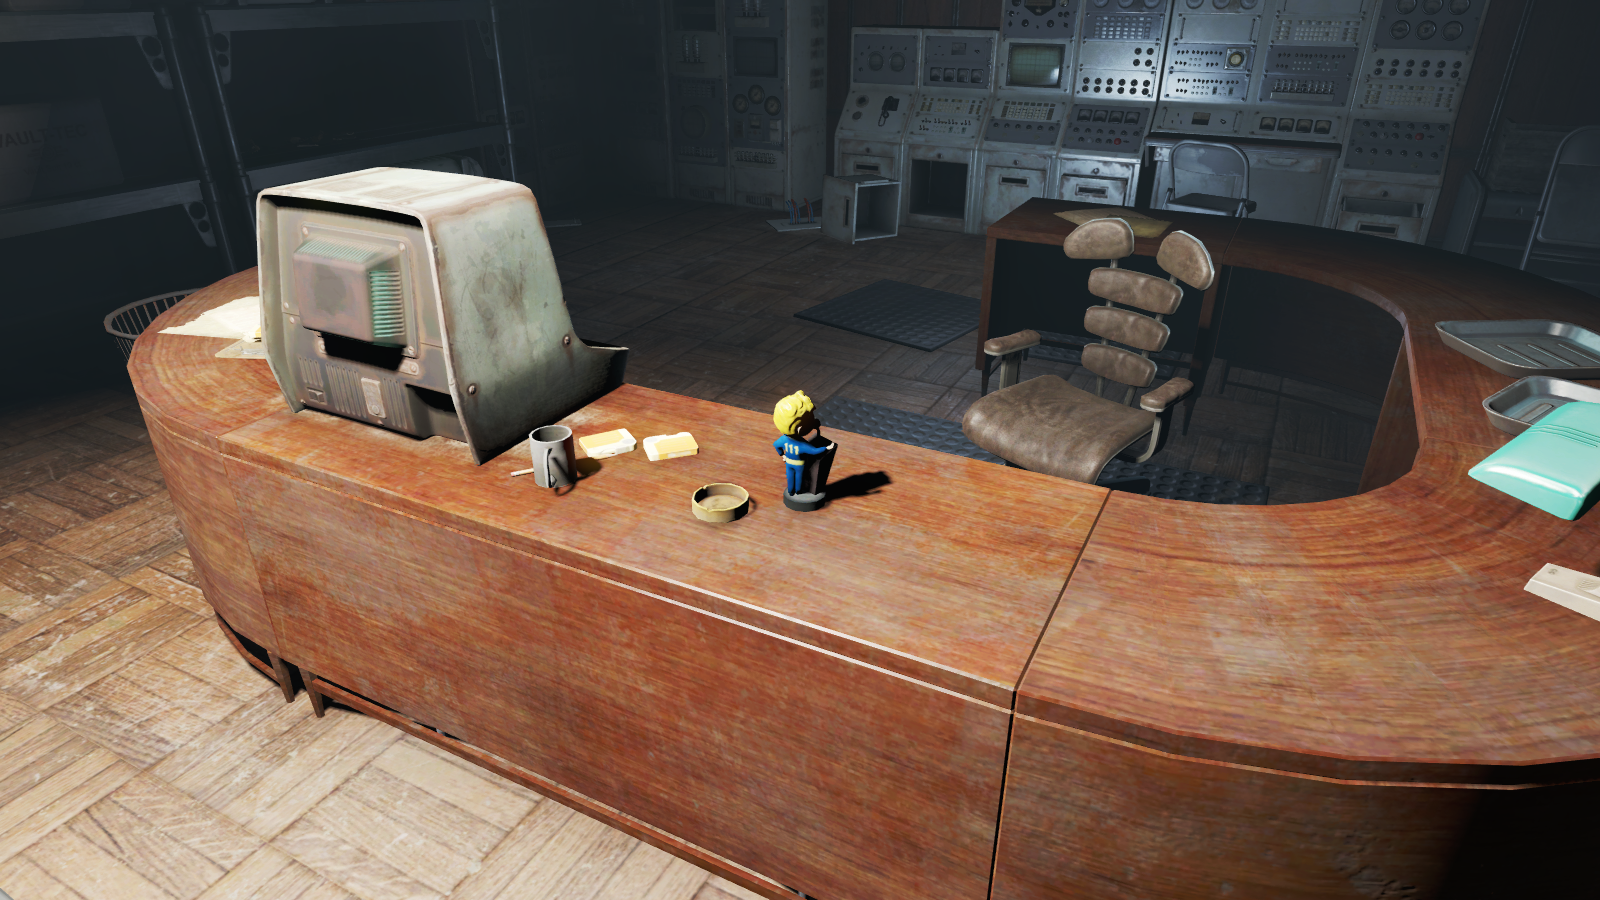 It is found in the Vault 114 Overseer's Office where you find... 